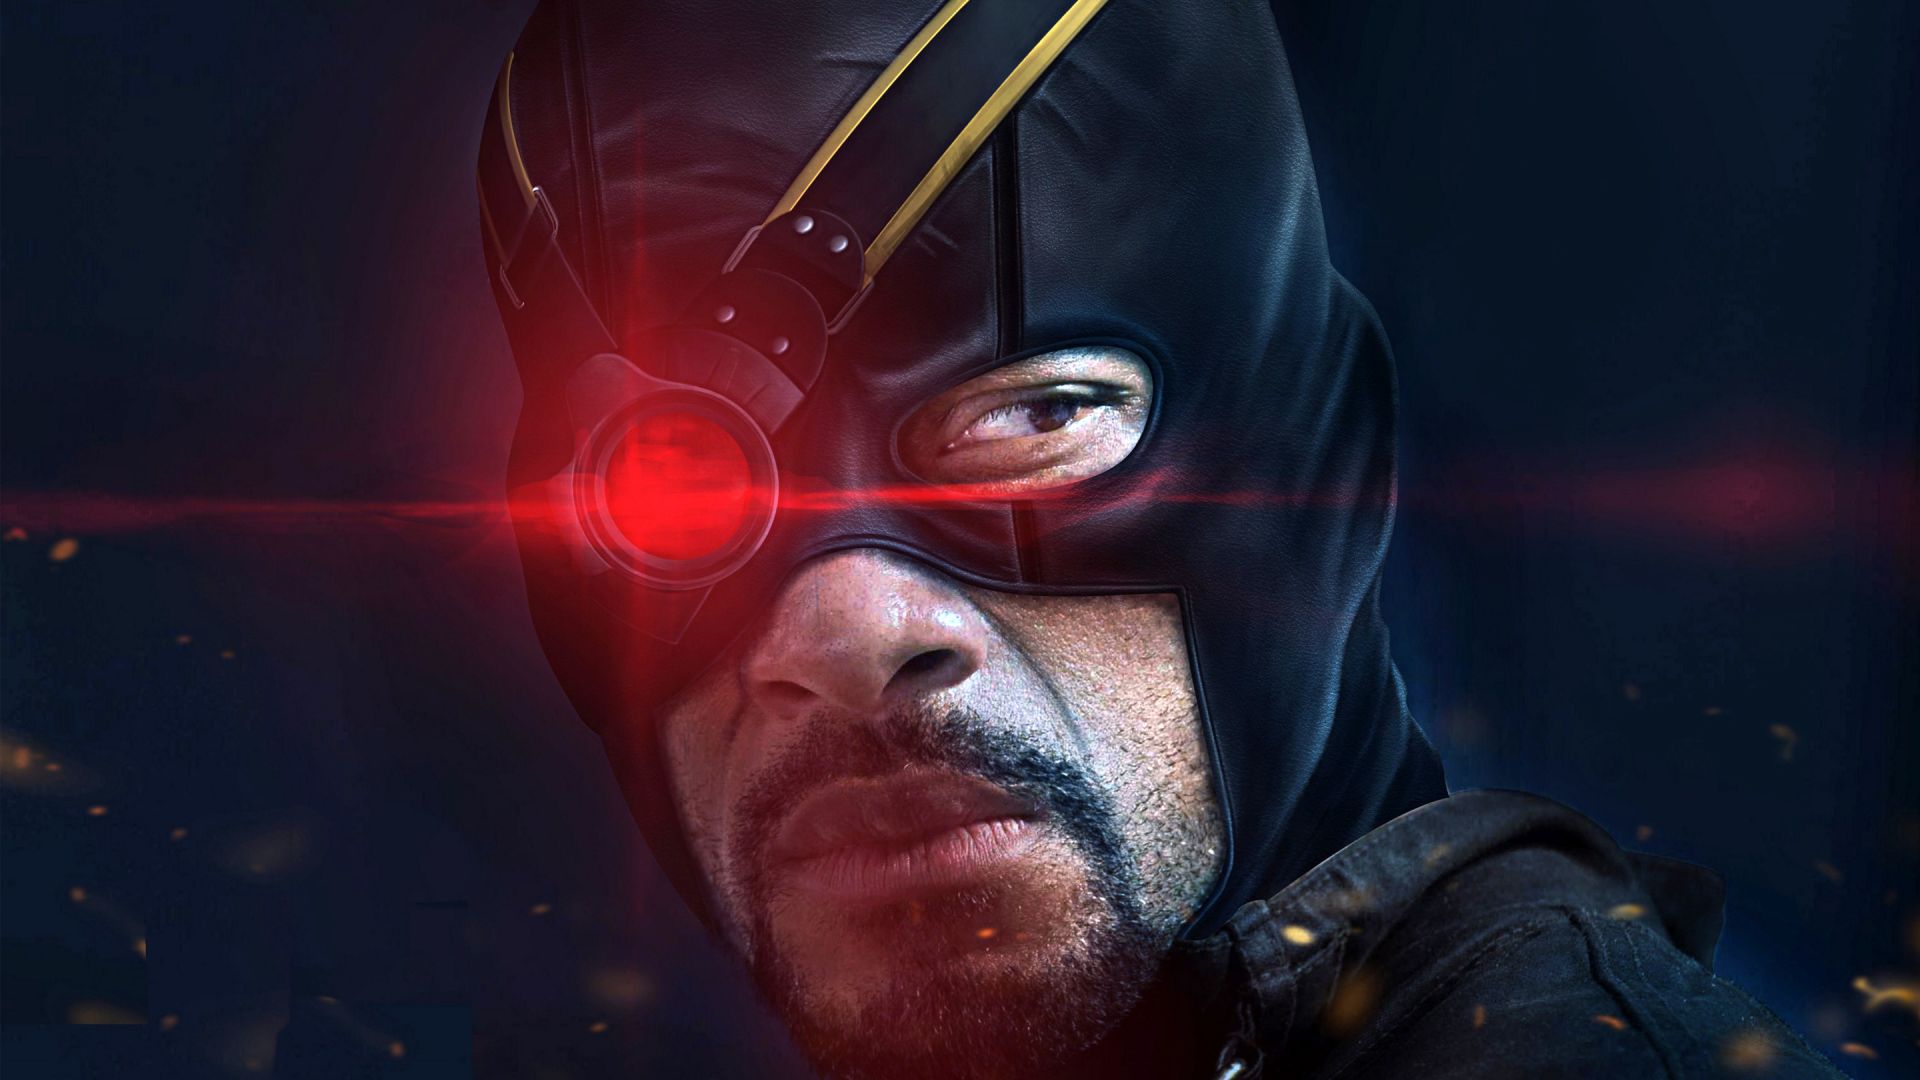 Wallpaper Will Smith as deadshot in movie Suicide squad